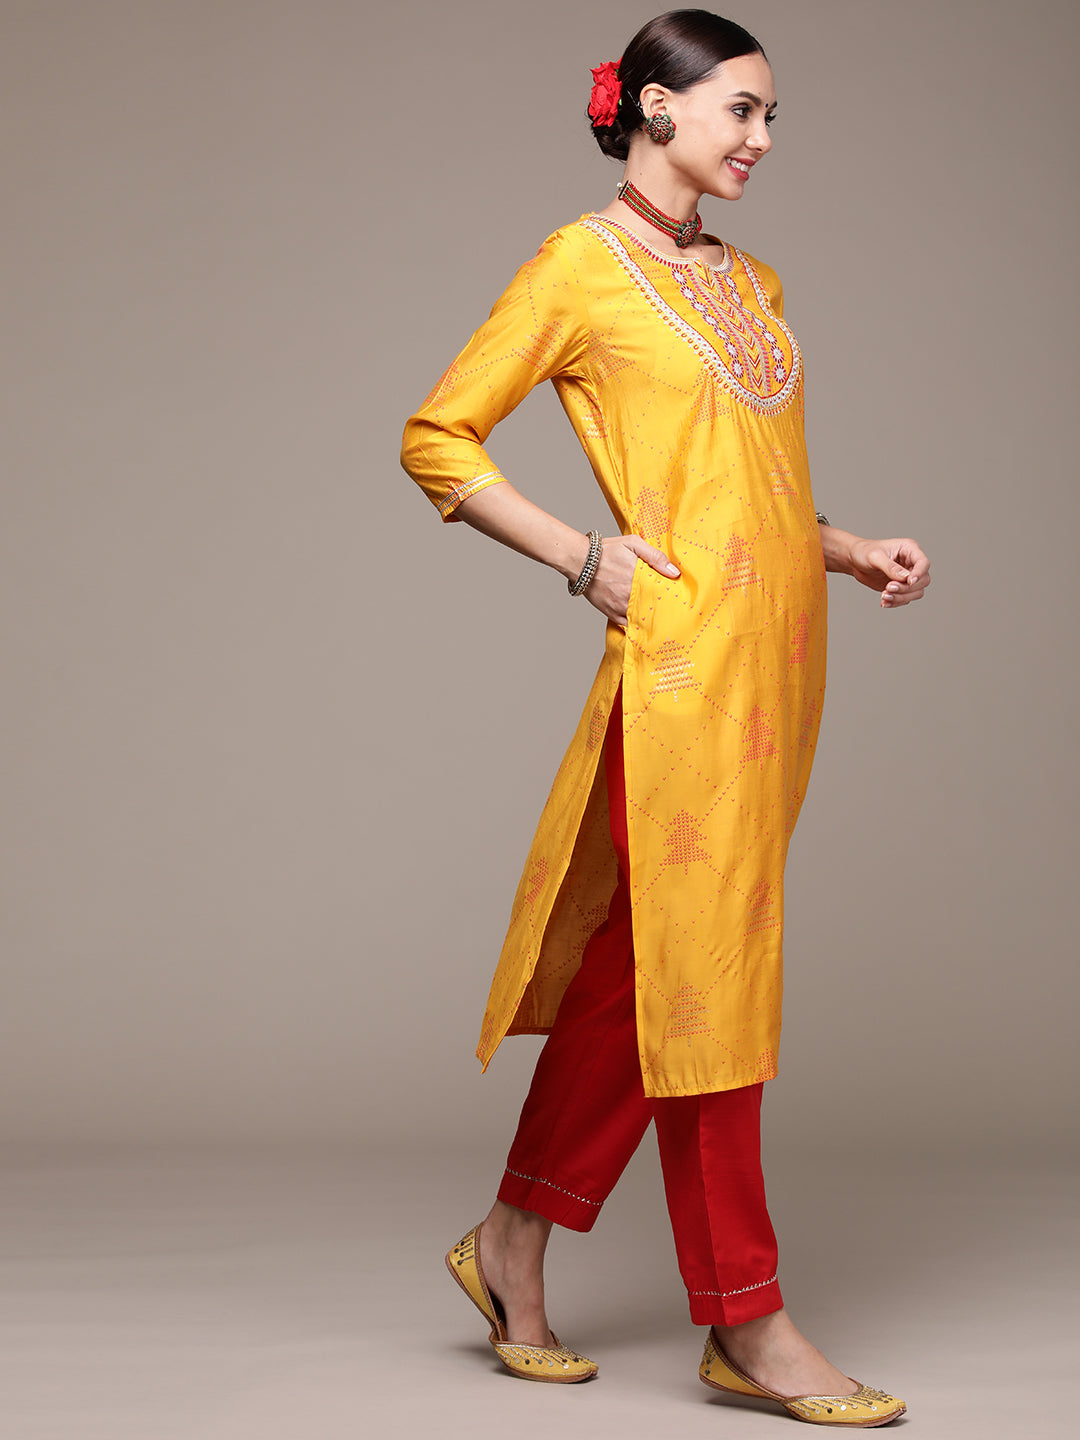 Women's Mustard Embroidered Ethnic Motifs Kurta Set with Trousers and Dupatta